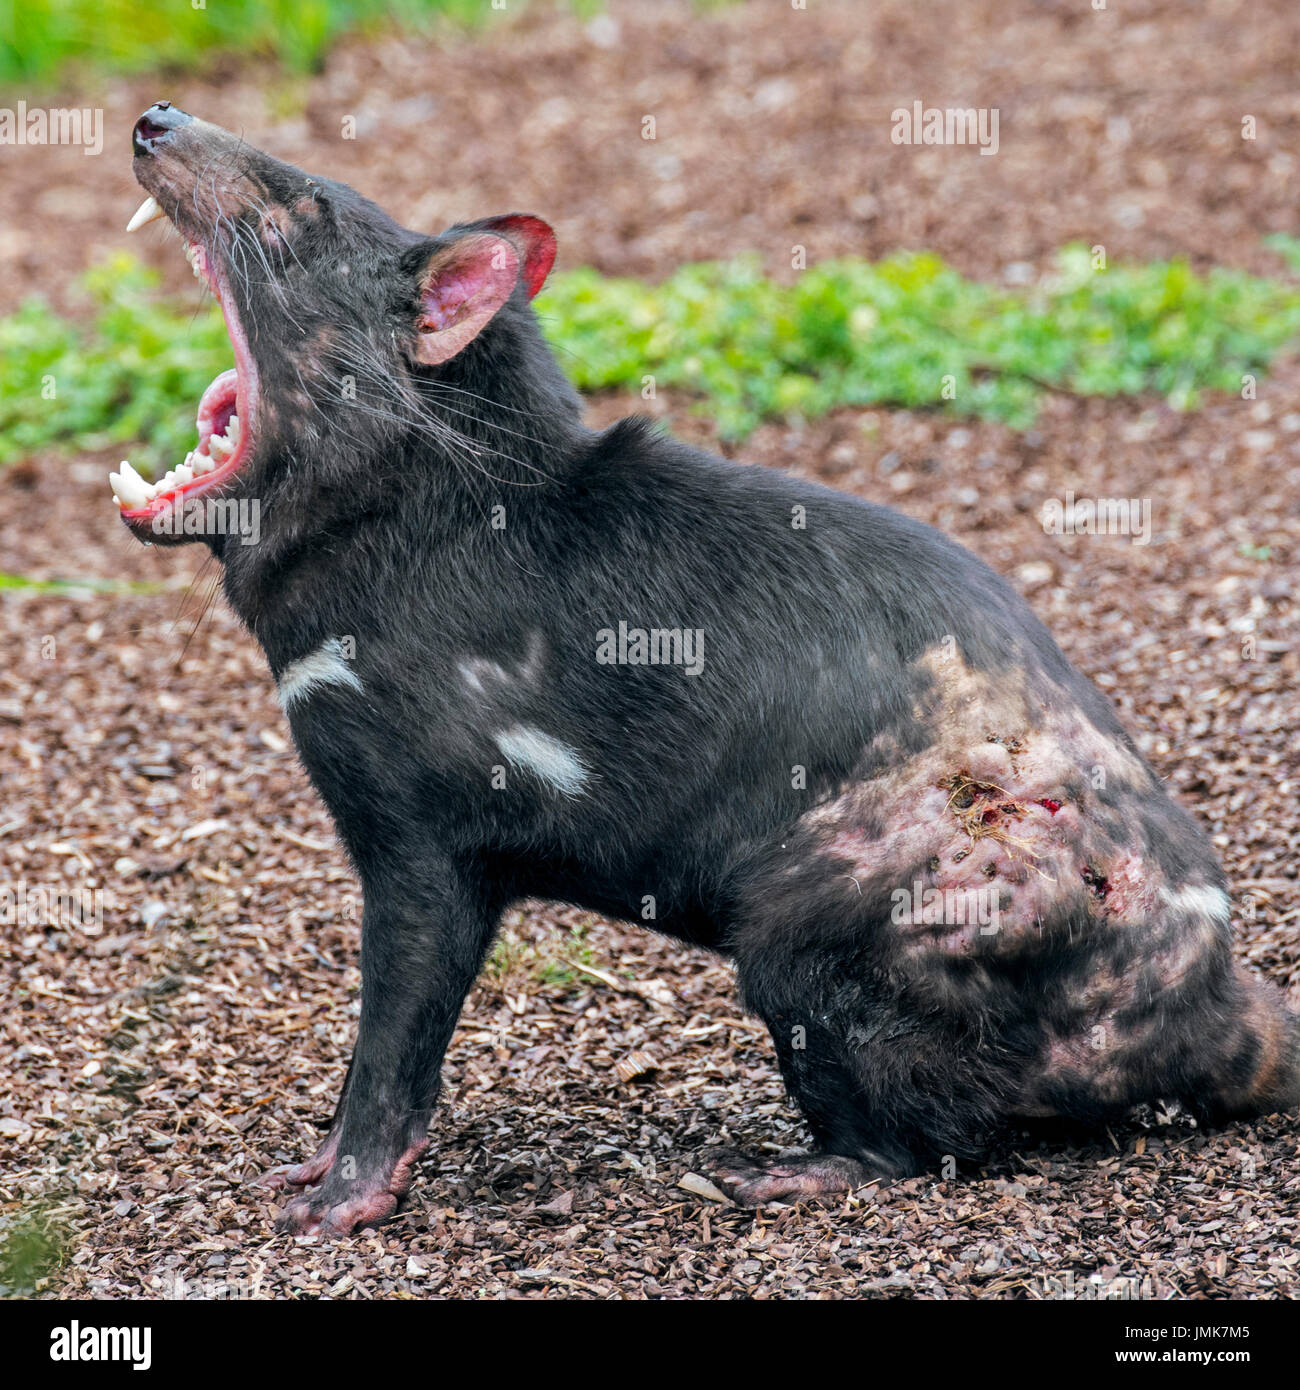 Wounded Tasmanian devil (Sarcophilus harrisii), marsupial native to Australia, covered in bitemarks and showing large teeth in wide open mouth Stock Photo